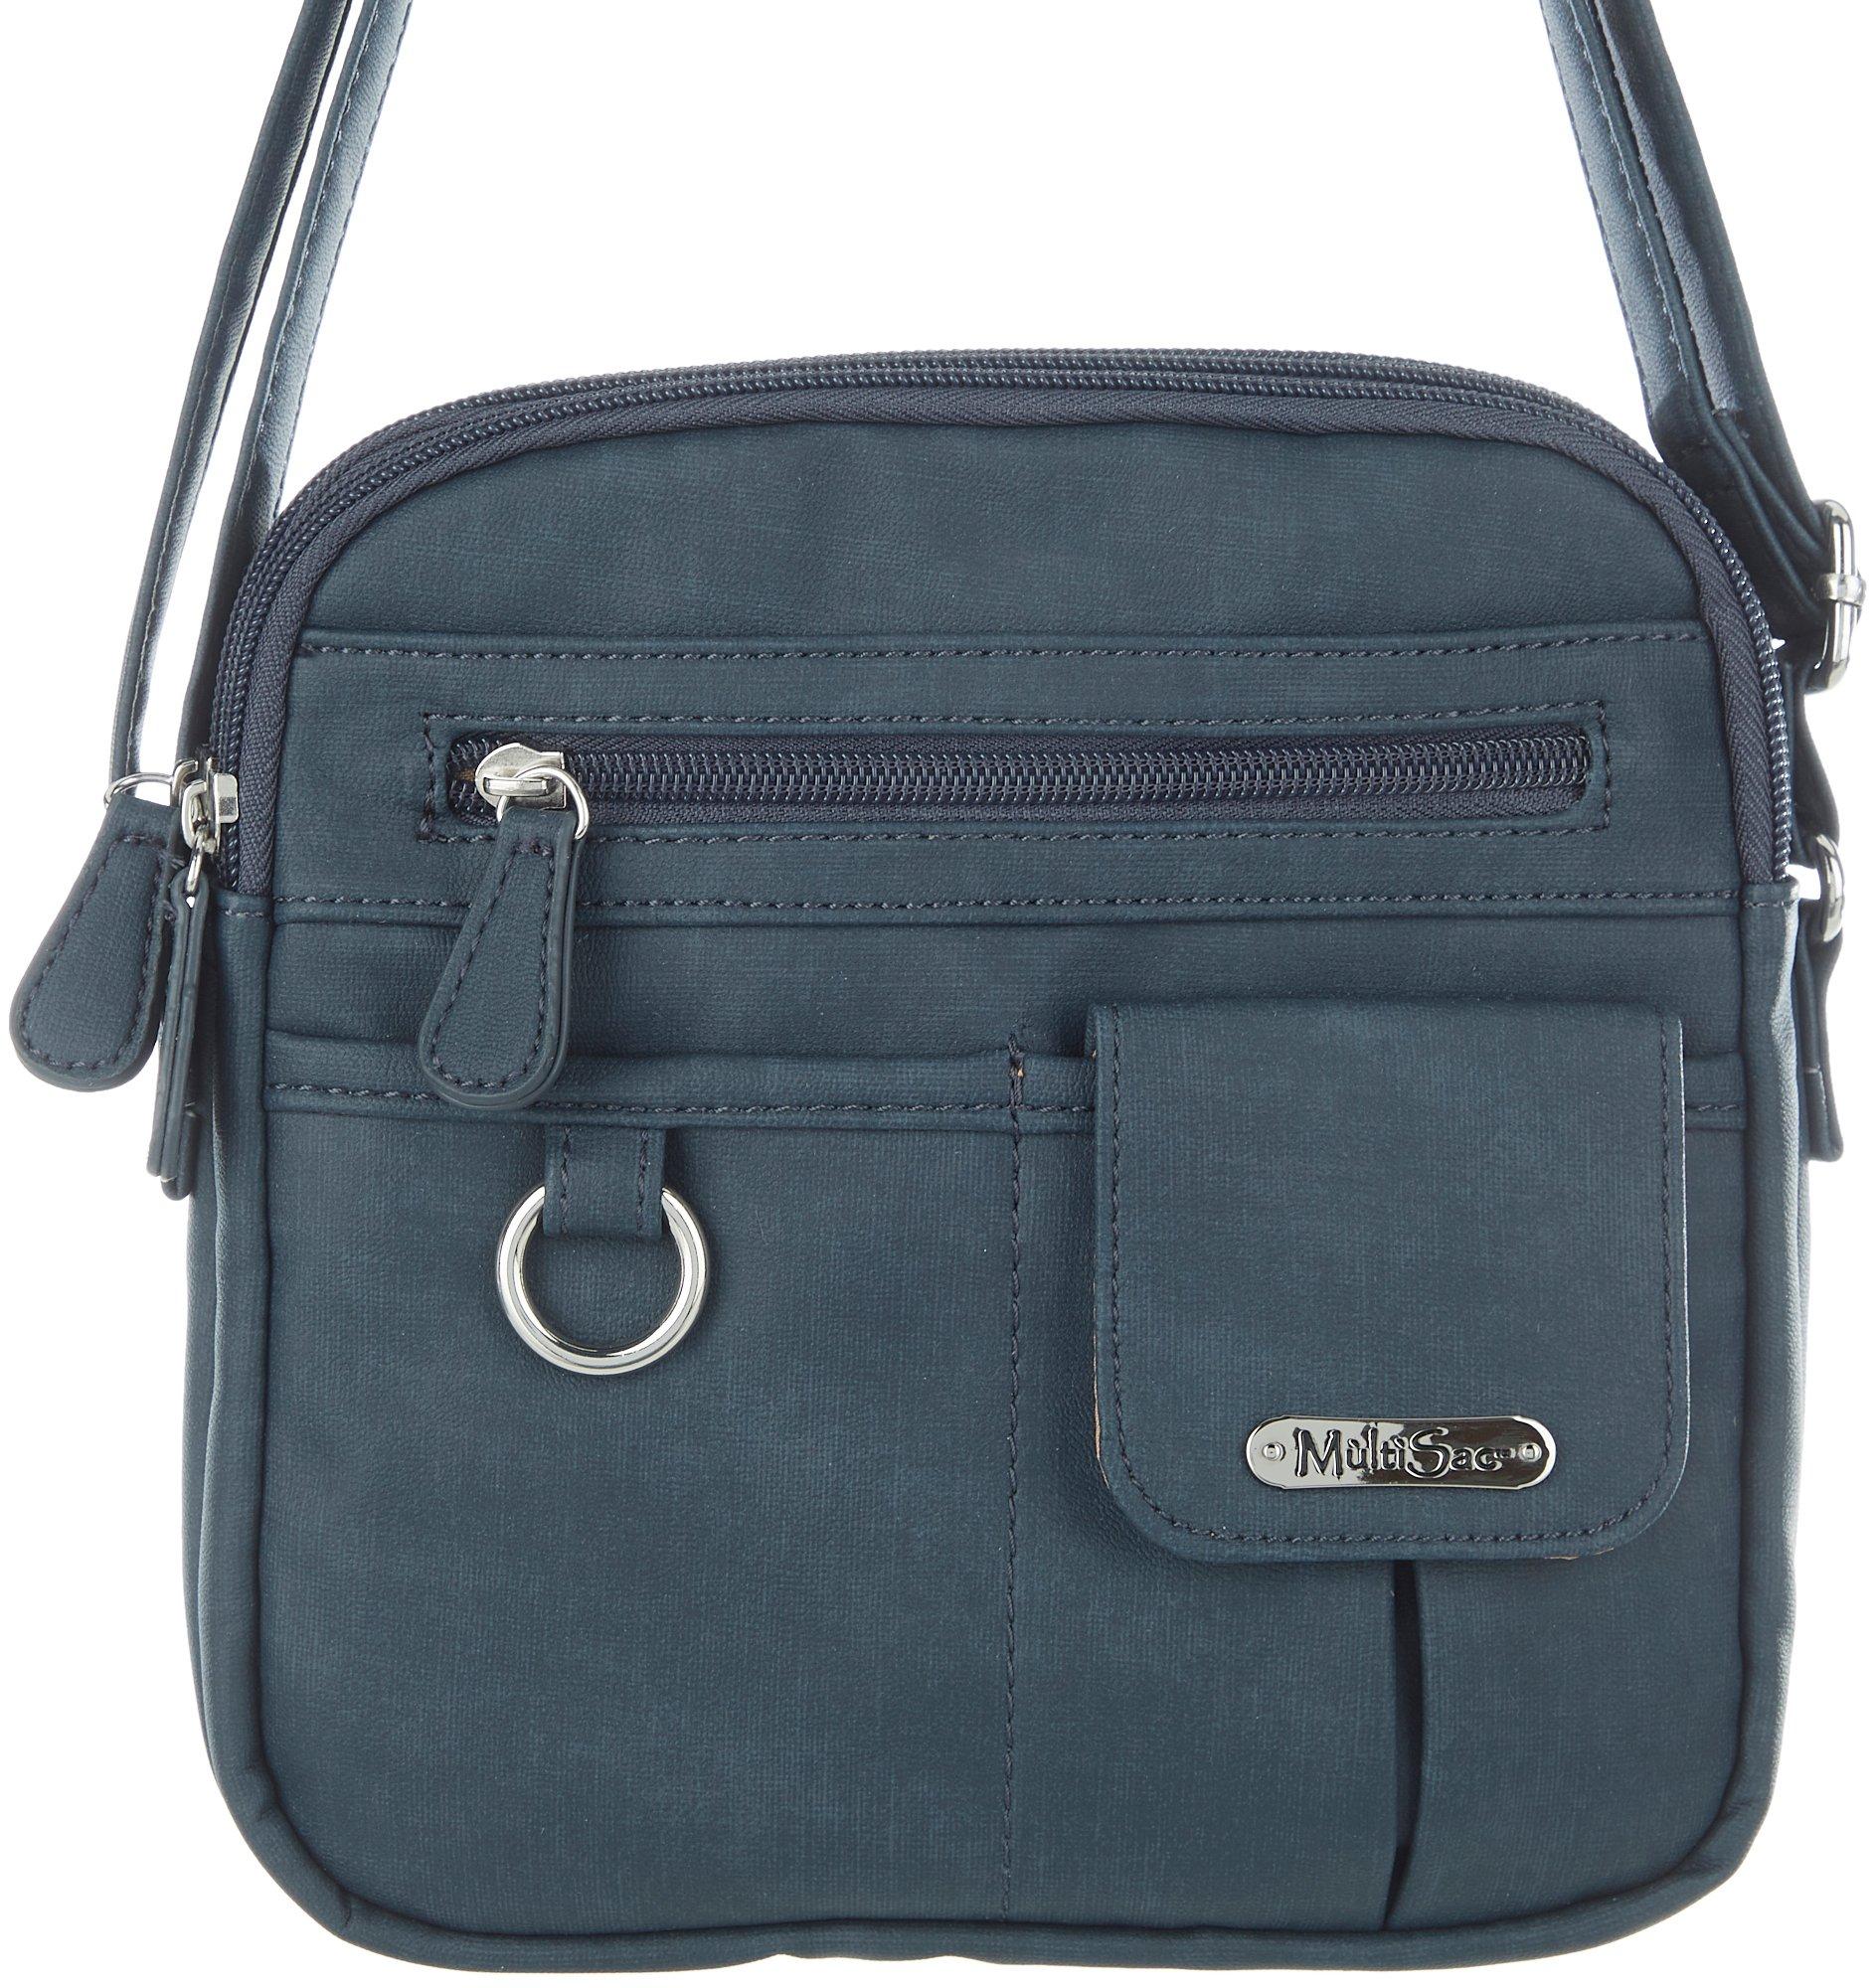 Multisac Solid North South 3-Compartment Crossbody